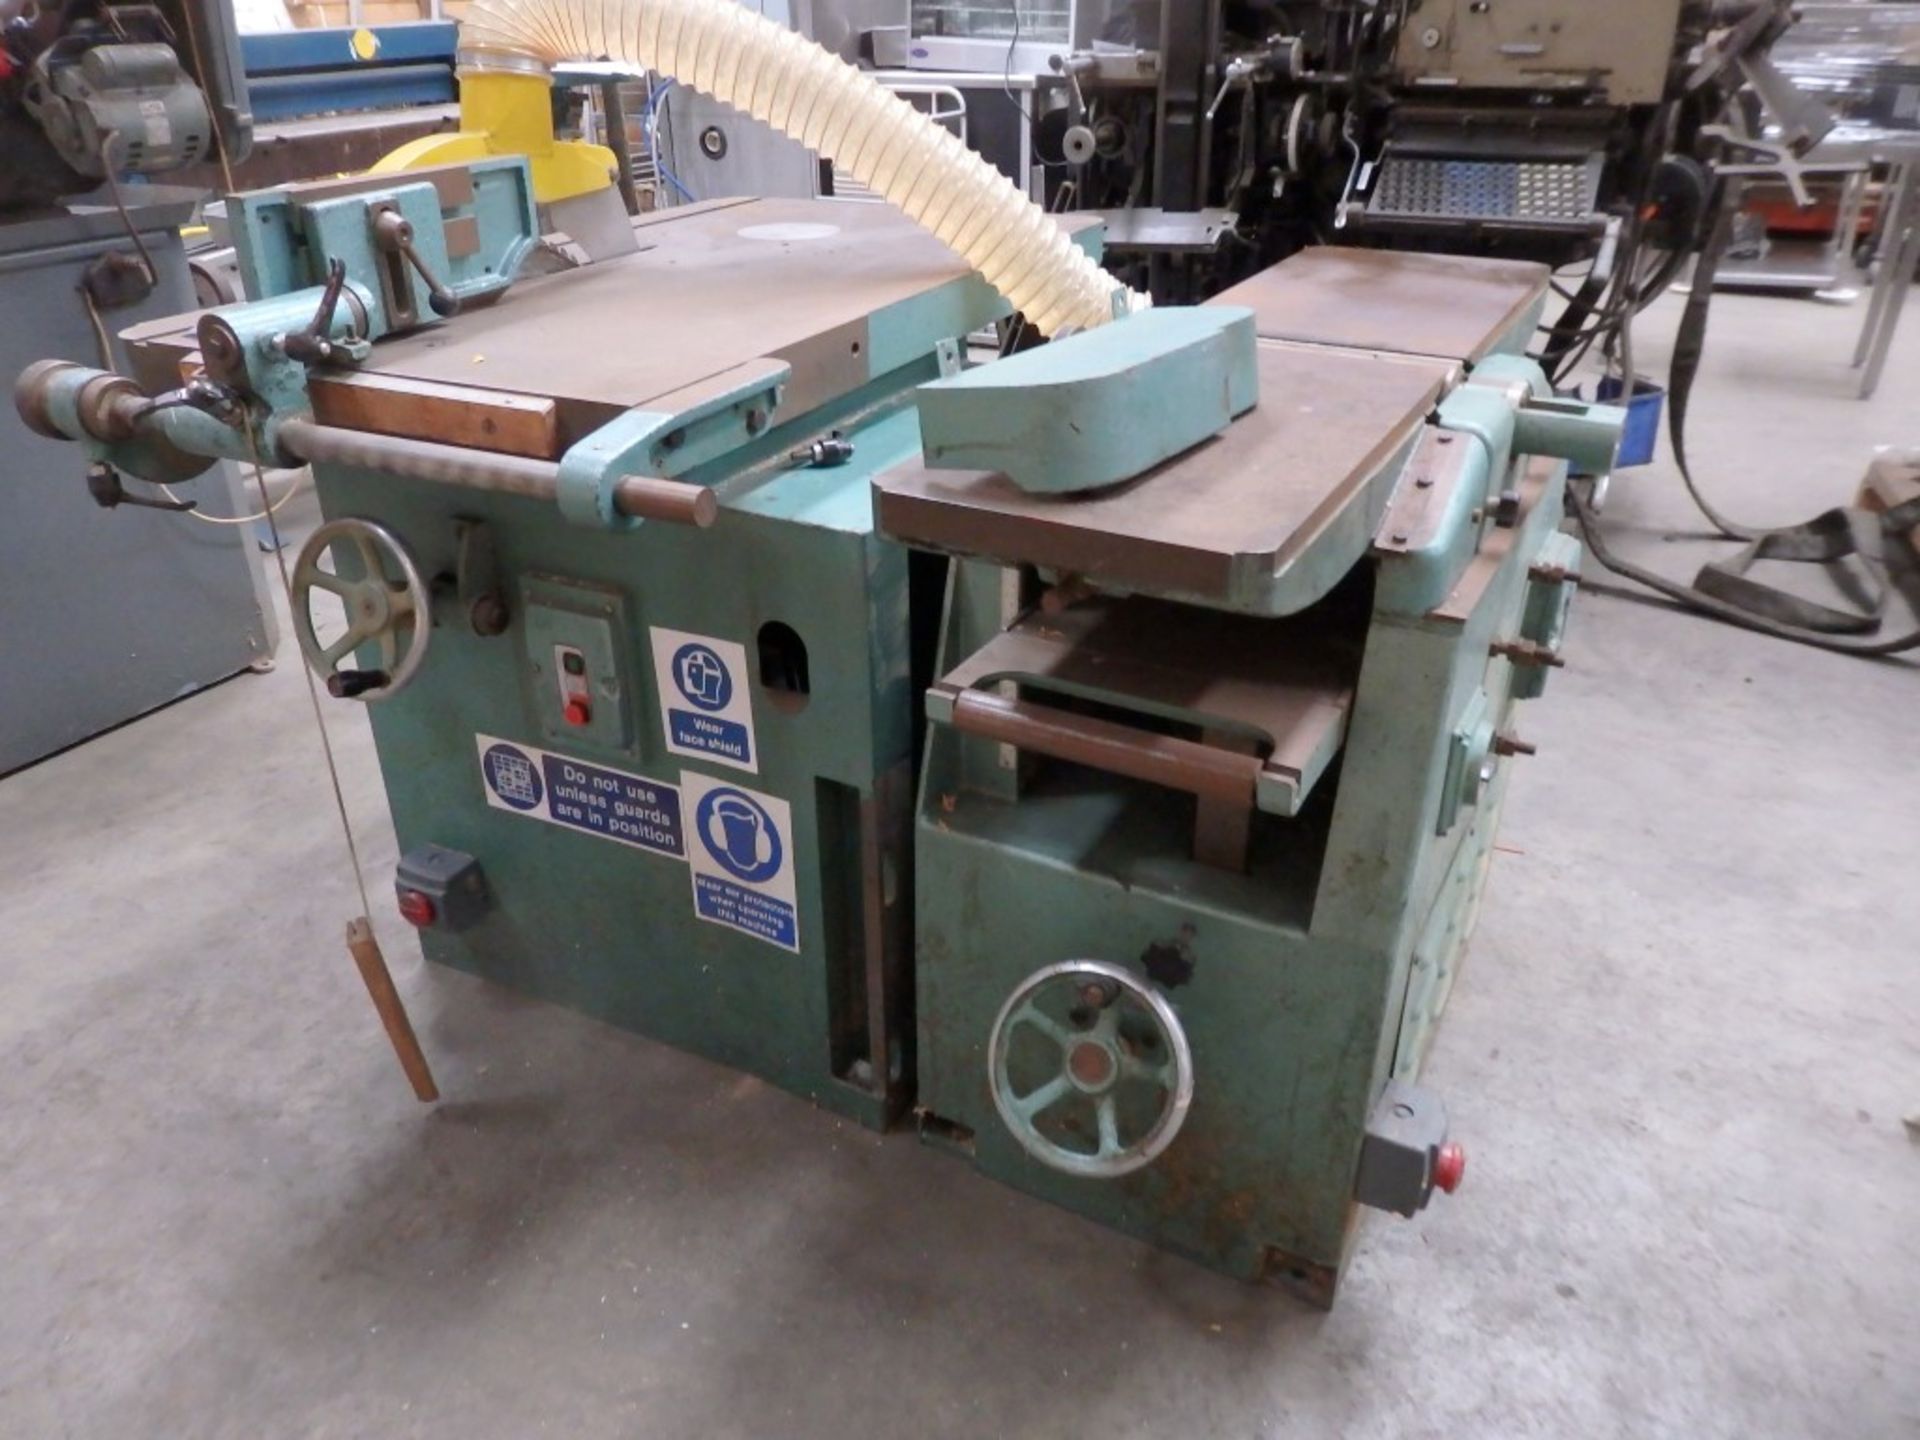 1 x COOKSLEY HEAVY DUTY UNIVERSAL MACHINE,(12"X9" PLANER THICKNESSER & 16" SAW COMBINATION) - Ref - Image 11 of 12